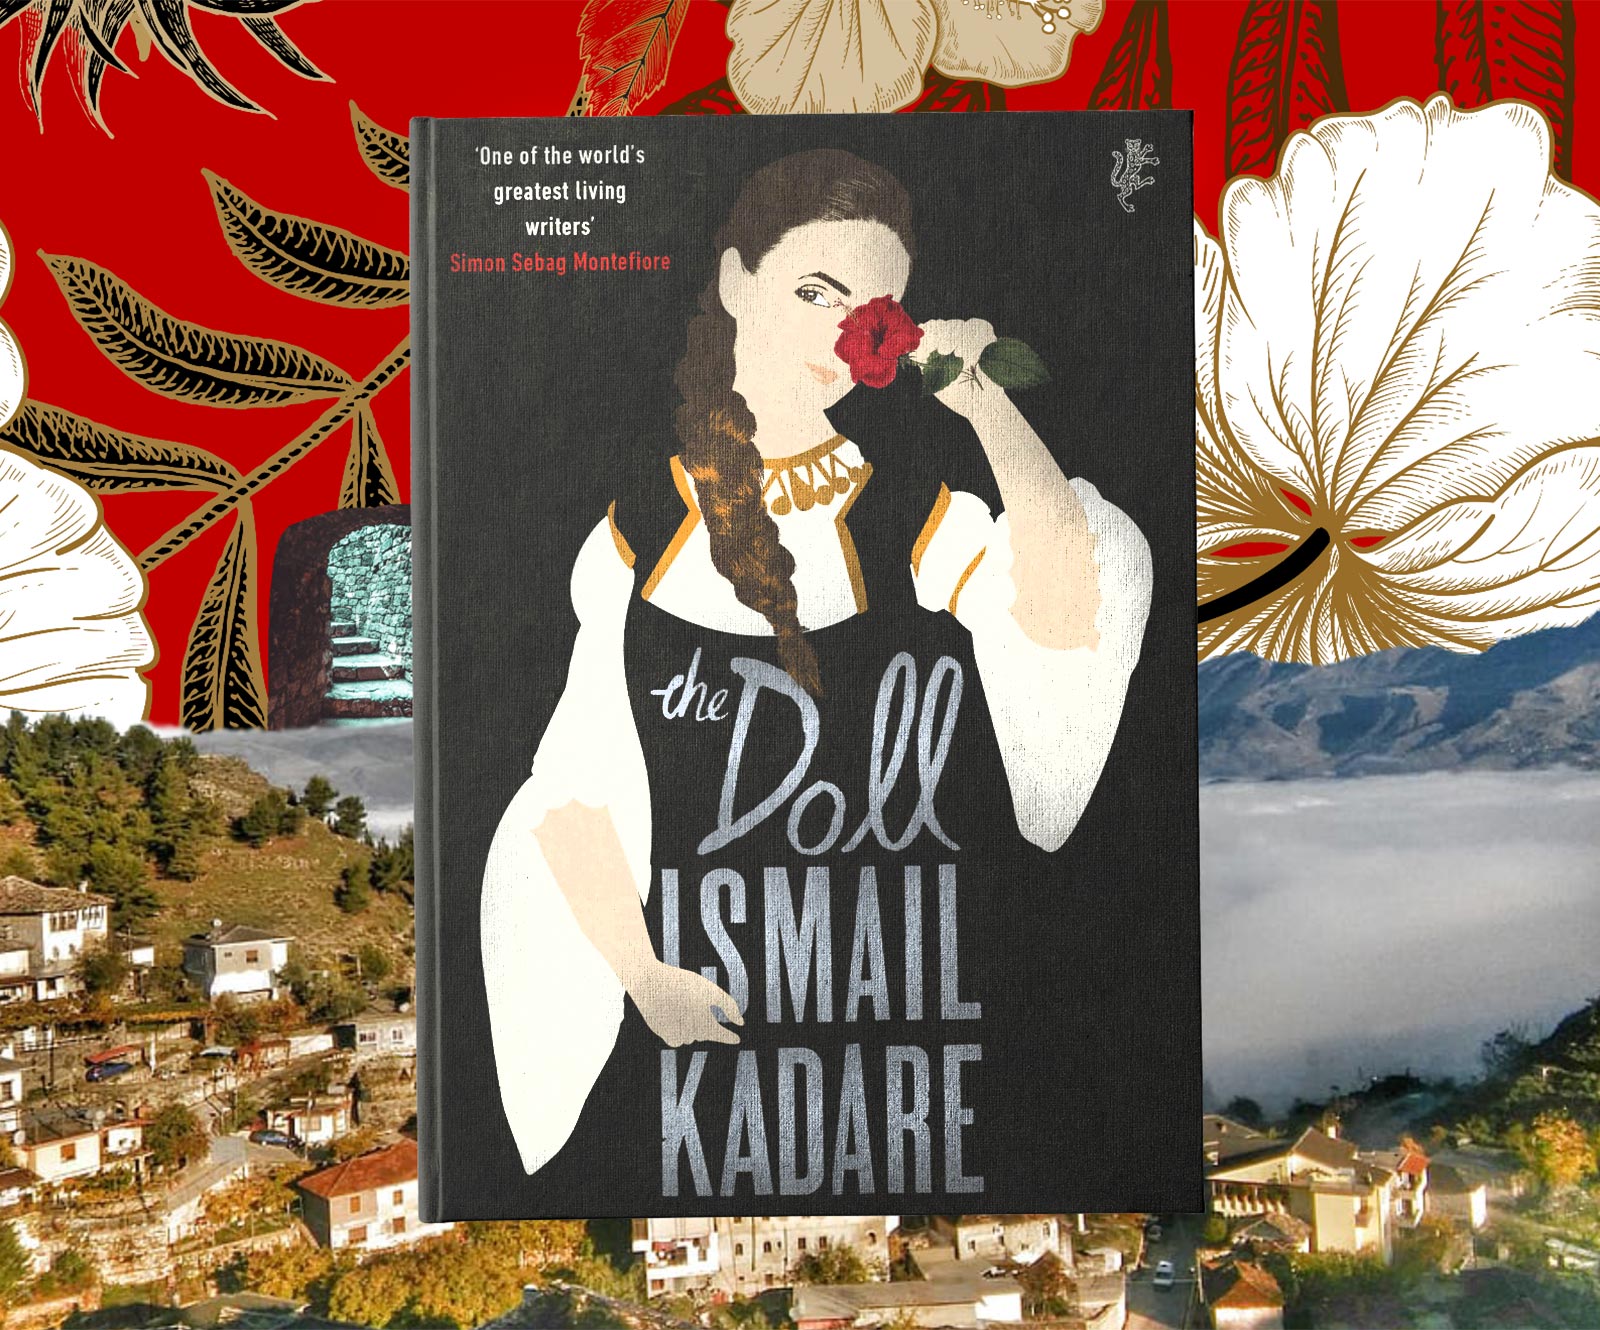 Can you ever truly know your mother? In the novel The Doll, Ismail Kadare thinks you can’t